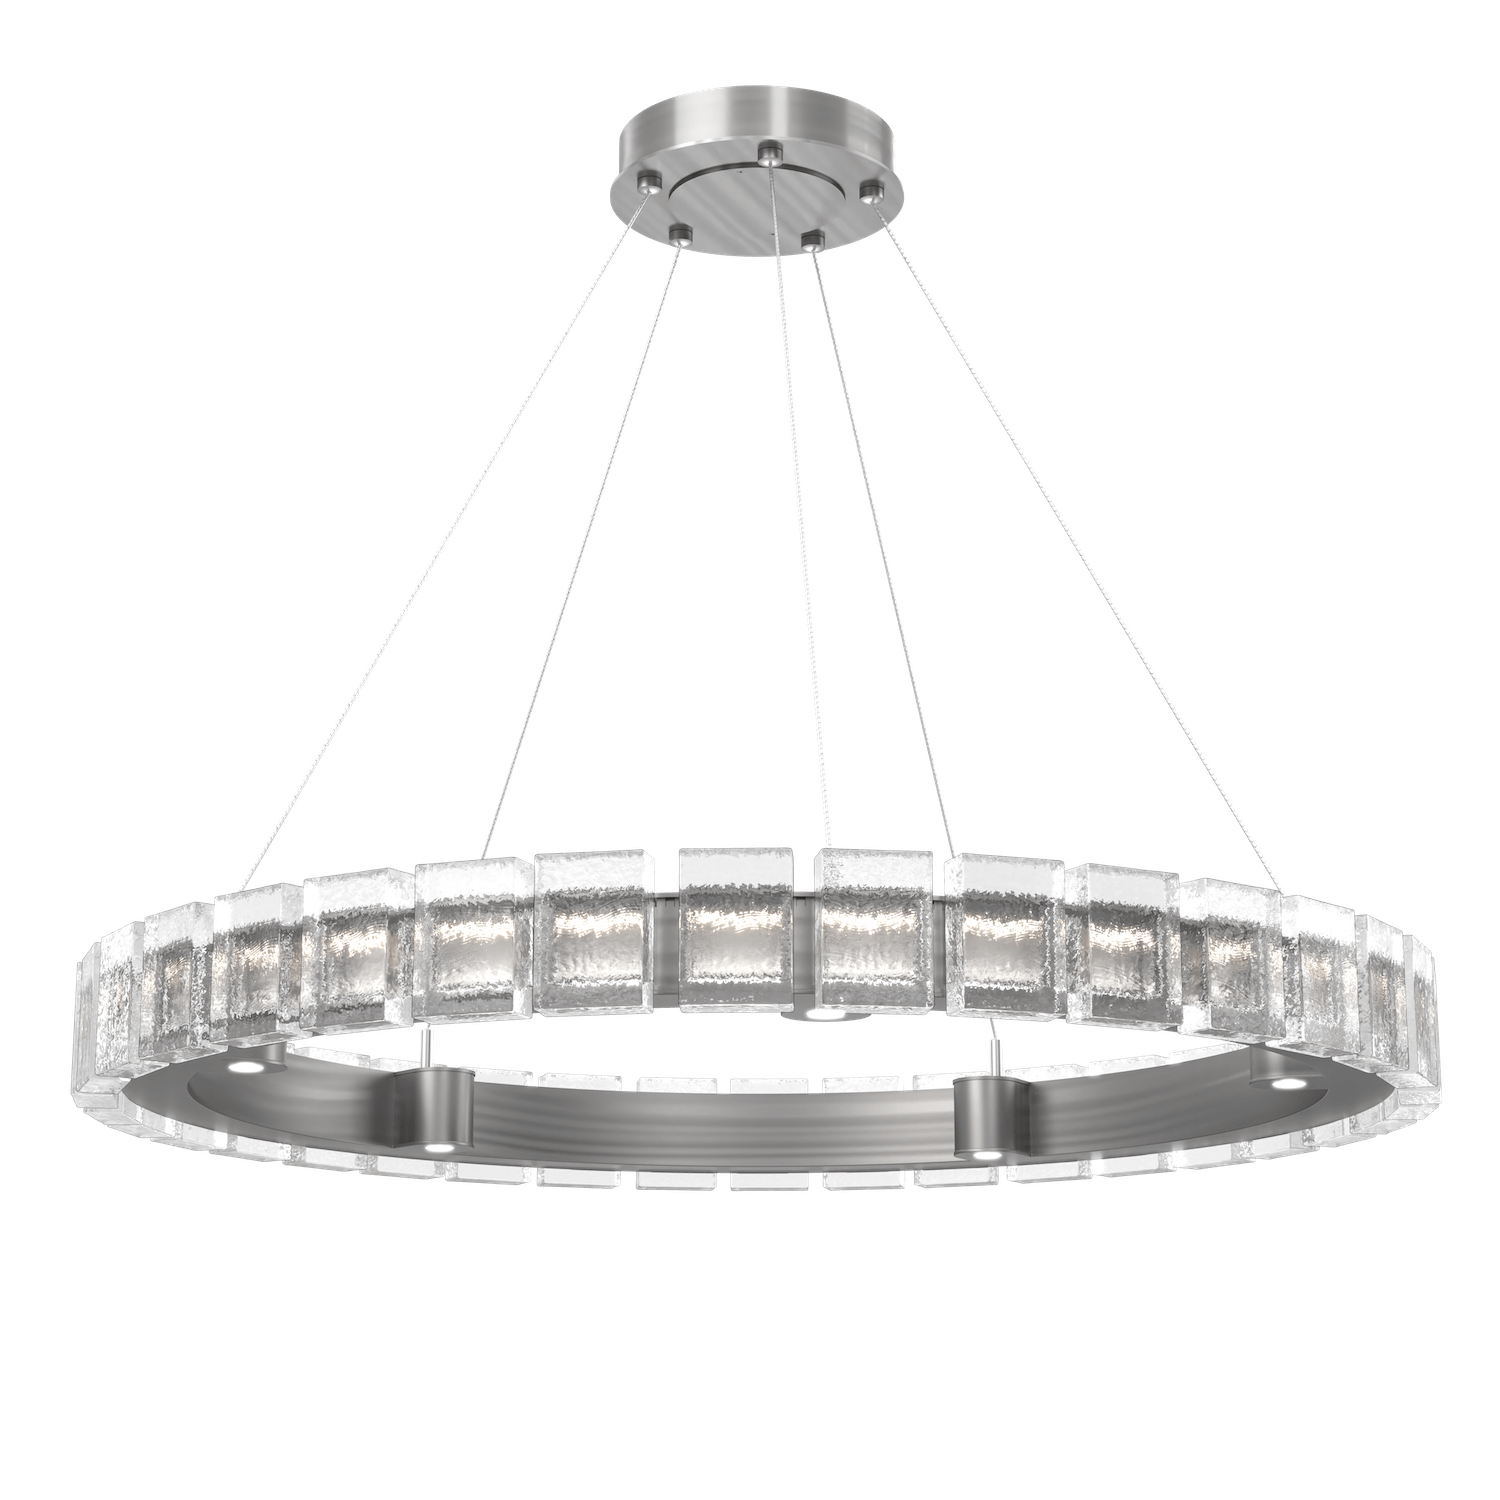 CHB0087-38-SN-TP-Hammerton-Studio-Tessera-38-inch-ring-chandelier-with-satin-nickel-finish-and-clear-pave-cast-glass-shade-and-LED-lamping